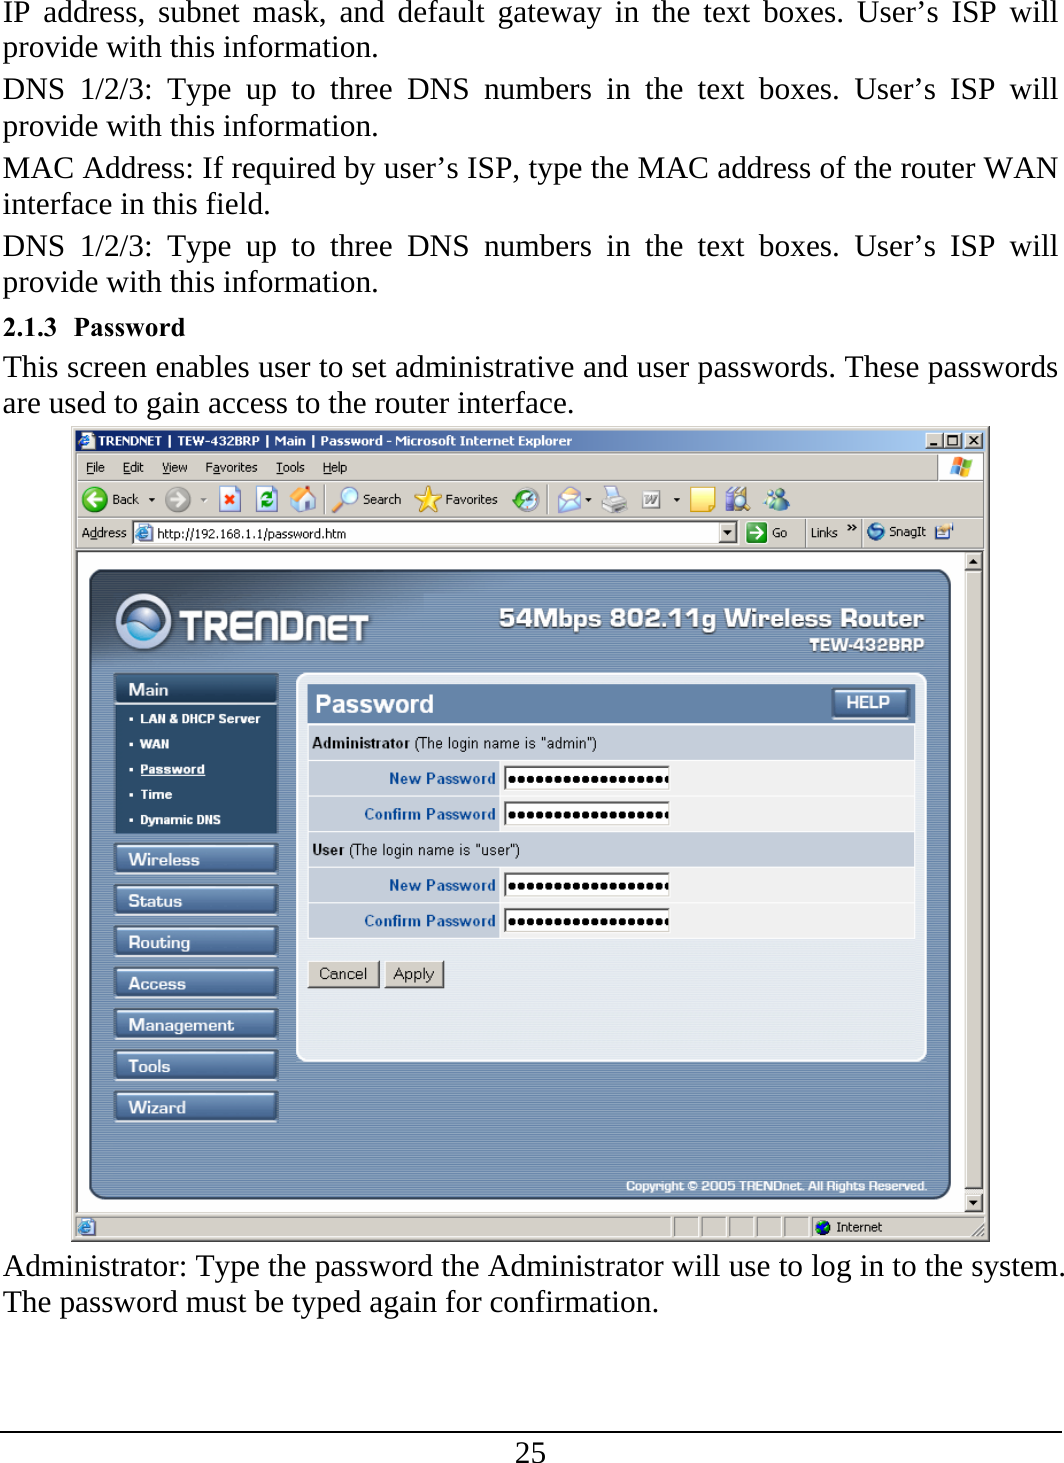 25 IP address, subnet mask, and default gateway in the text boxes. User’s ISP will provide with this information. DNS 1/2/3: Type up to three DNS numbers in the text boxes. User’s ISP will provide with this information. MAC Address: If required by user’s ISP, type the MAC address of the router WAN interface in this field. DNS 1/2/3: Type up to three DNS numbers in the text boxes. User’s ISP will provide with this information. 2.1.3 Password This screen enables user to set administrative and user passwords. These passwords are used to gain access to the router interface.  Administrator: Type the password the Administrator will use to log in to the system. The password must be typed again for confirmation. 